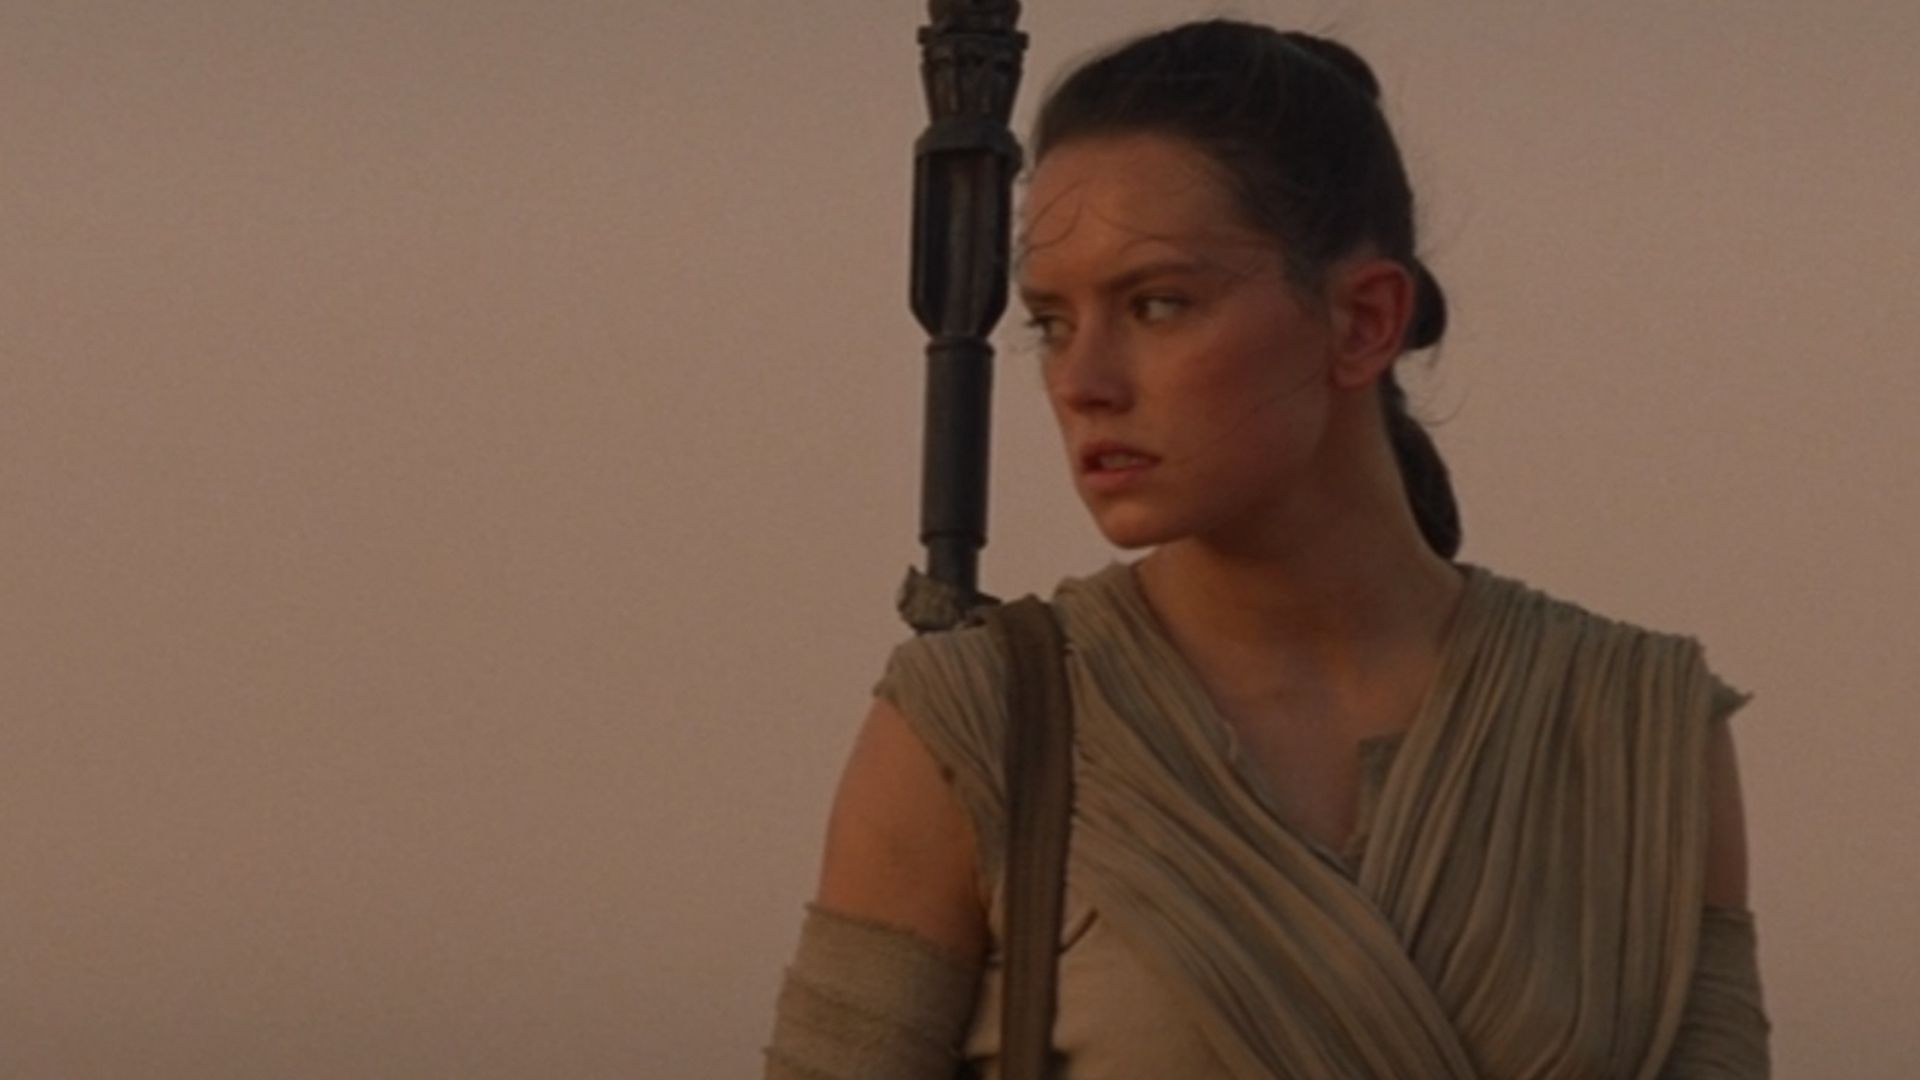 Rey from Star Wars in her scavenger outfit